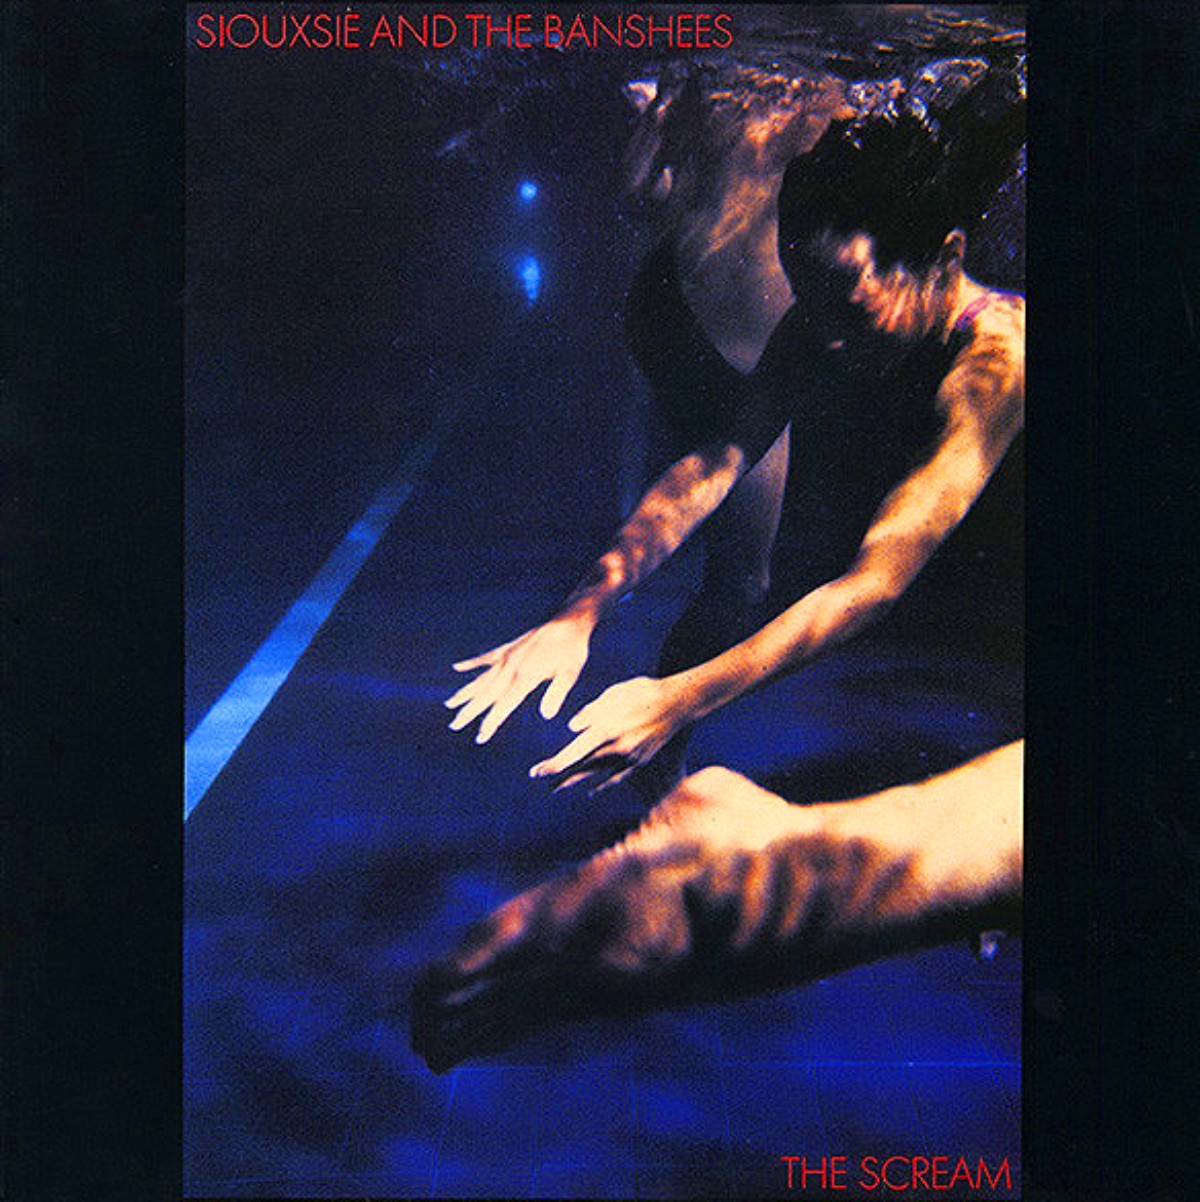 Siouxsie And The Banshees, album "The Scream" (1978)